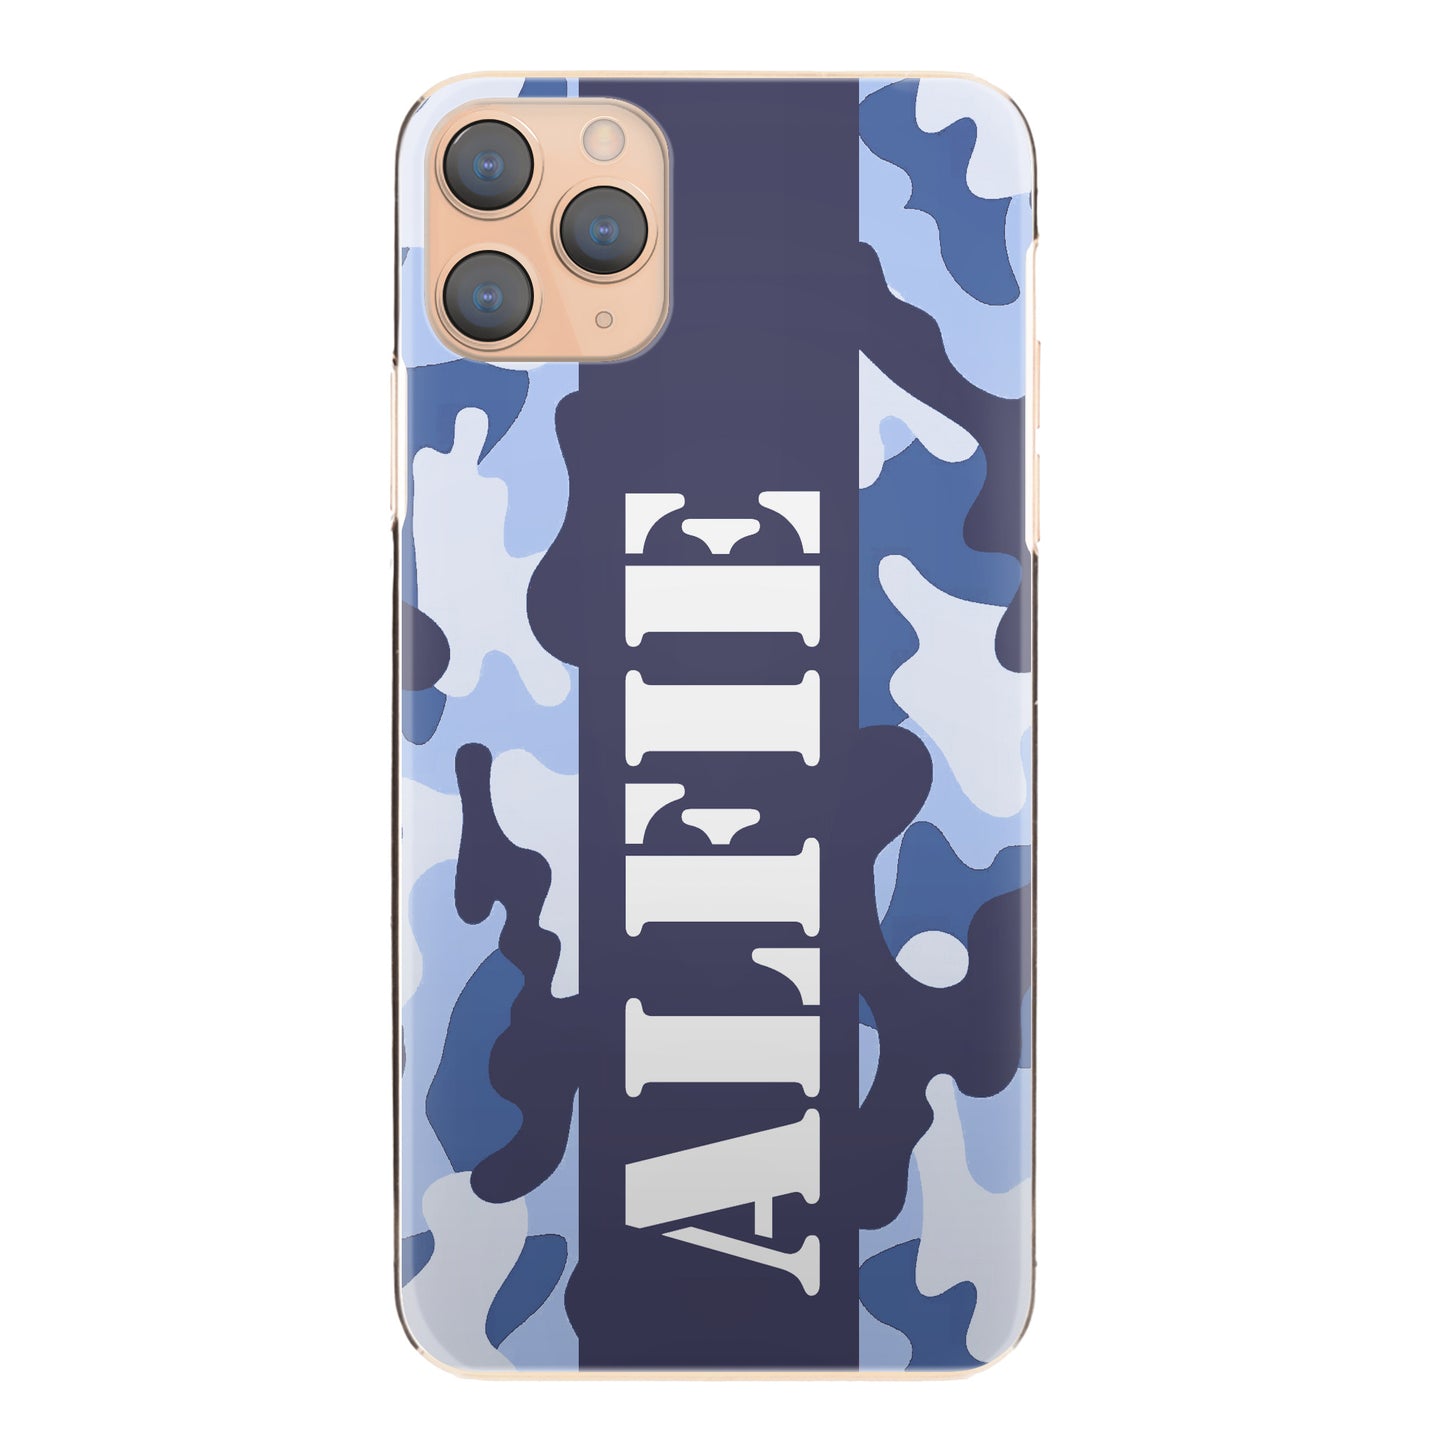 Personalised One Phone Hard Case with Military Text on Blue Camo